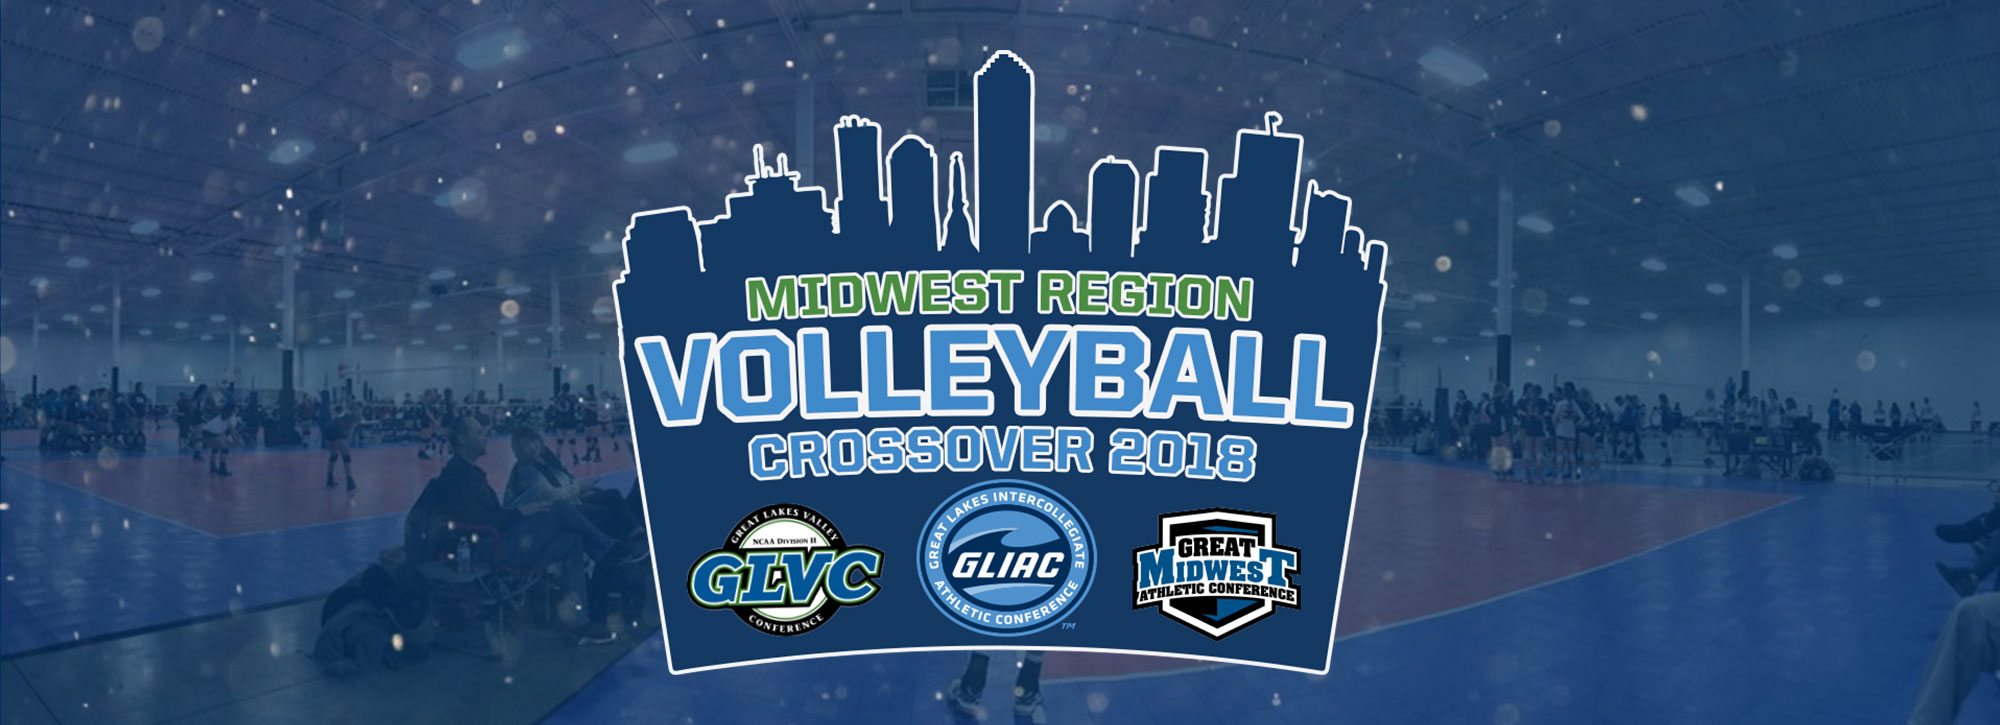 2018 Midwest Region Volleyball Crossover Begins Friday in Indianapolis